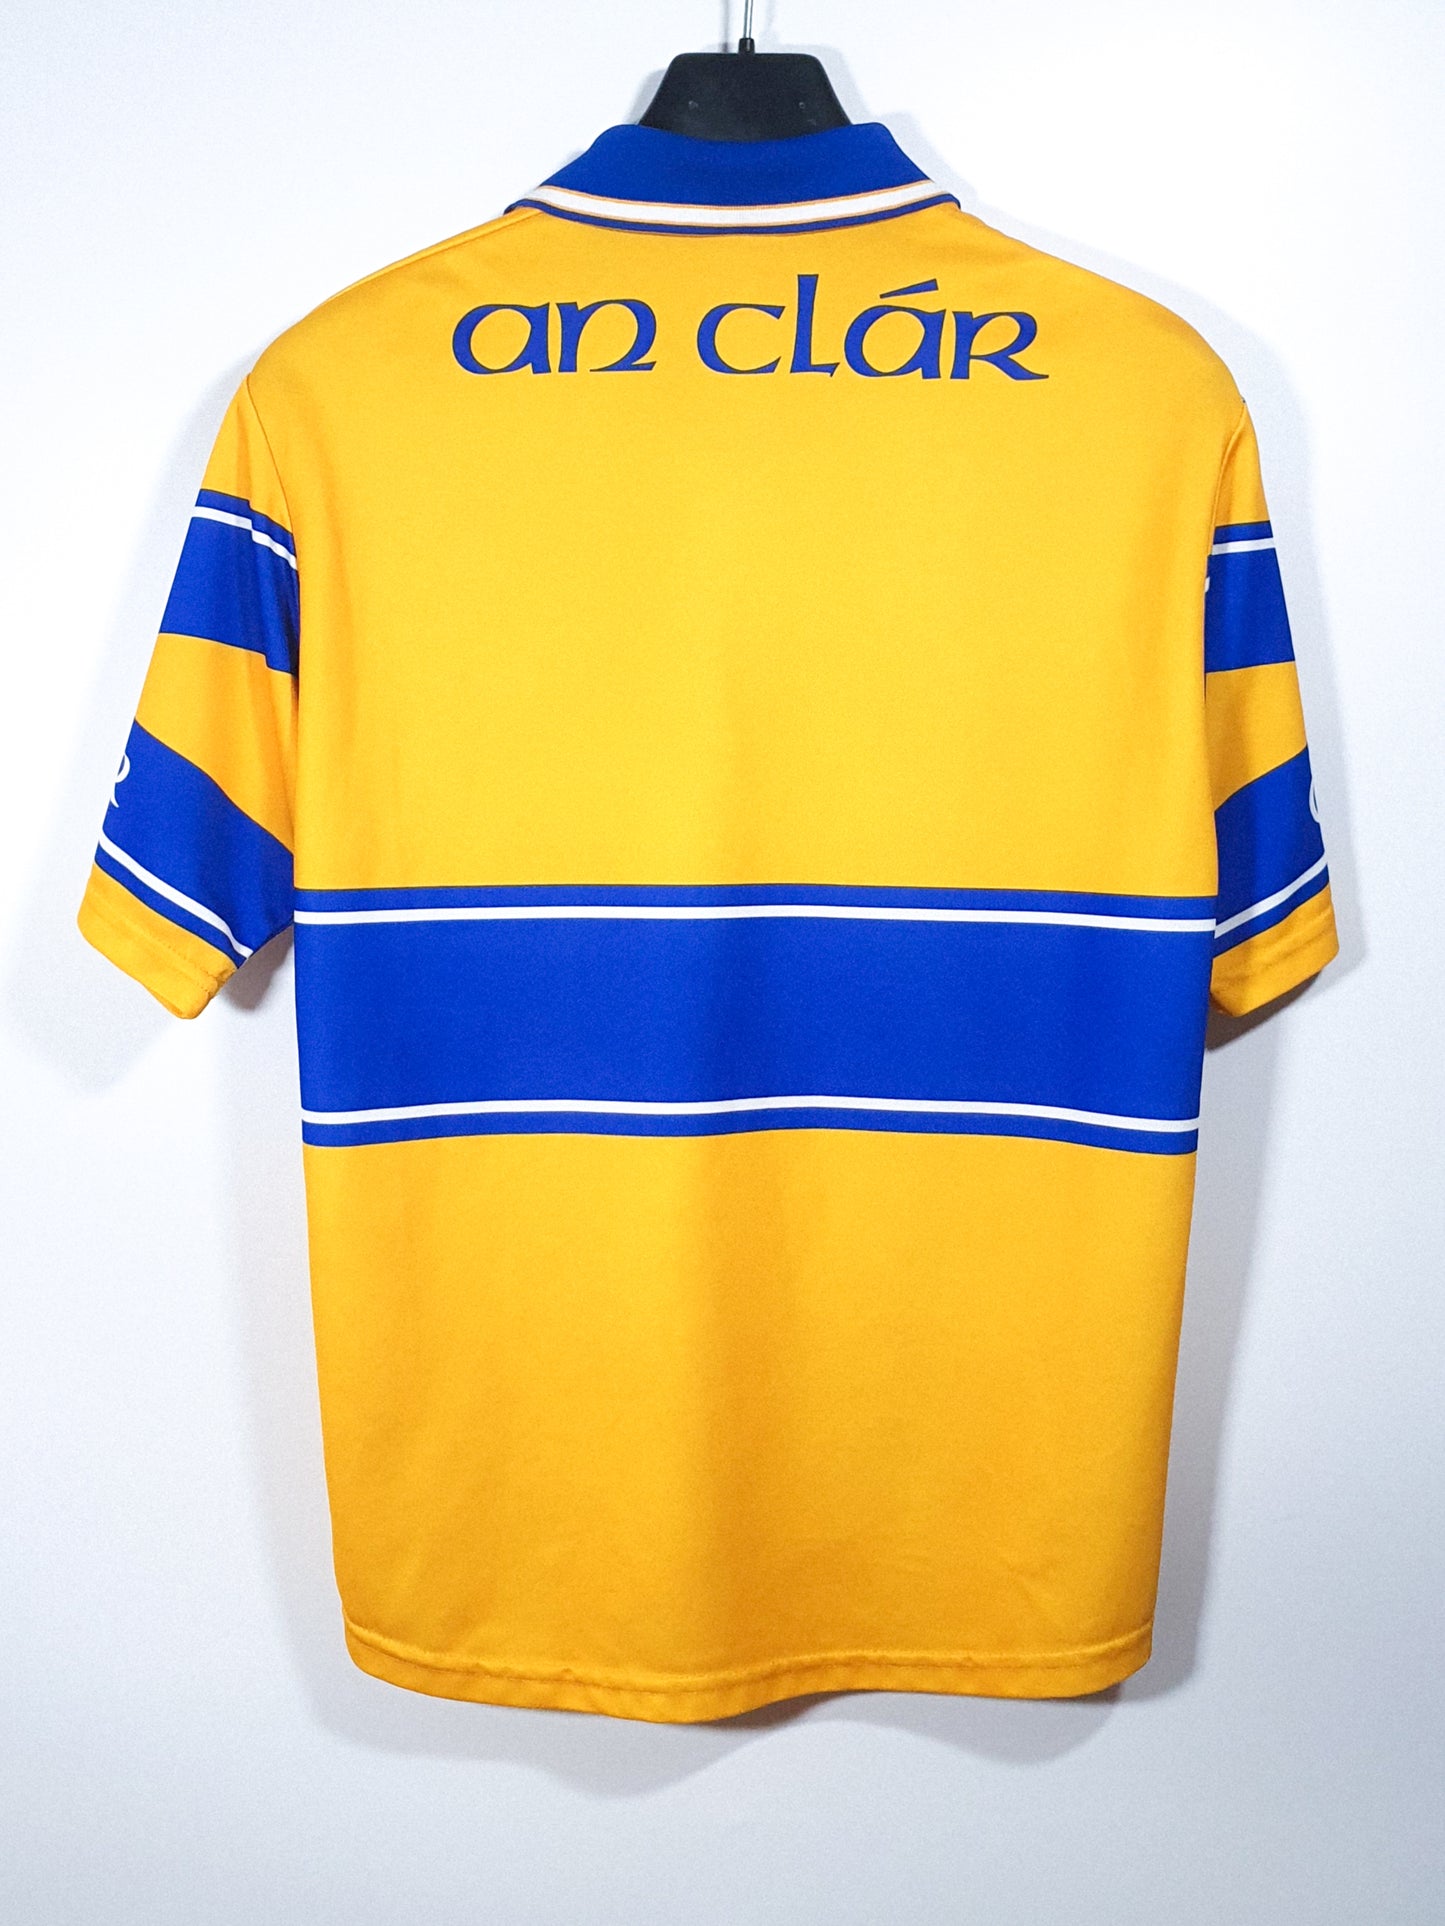 Clare 2002 (Youths)